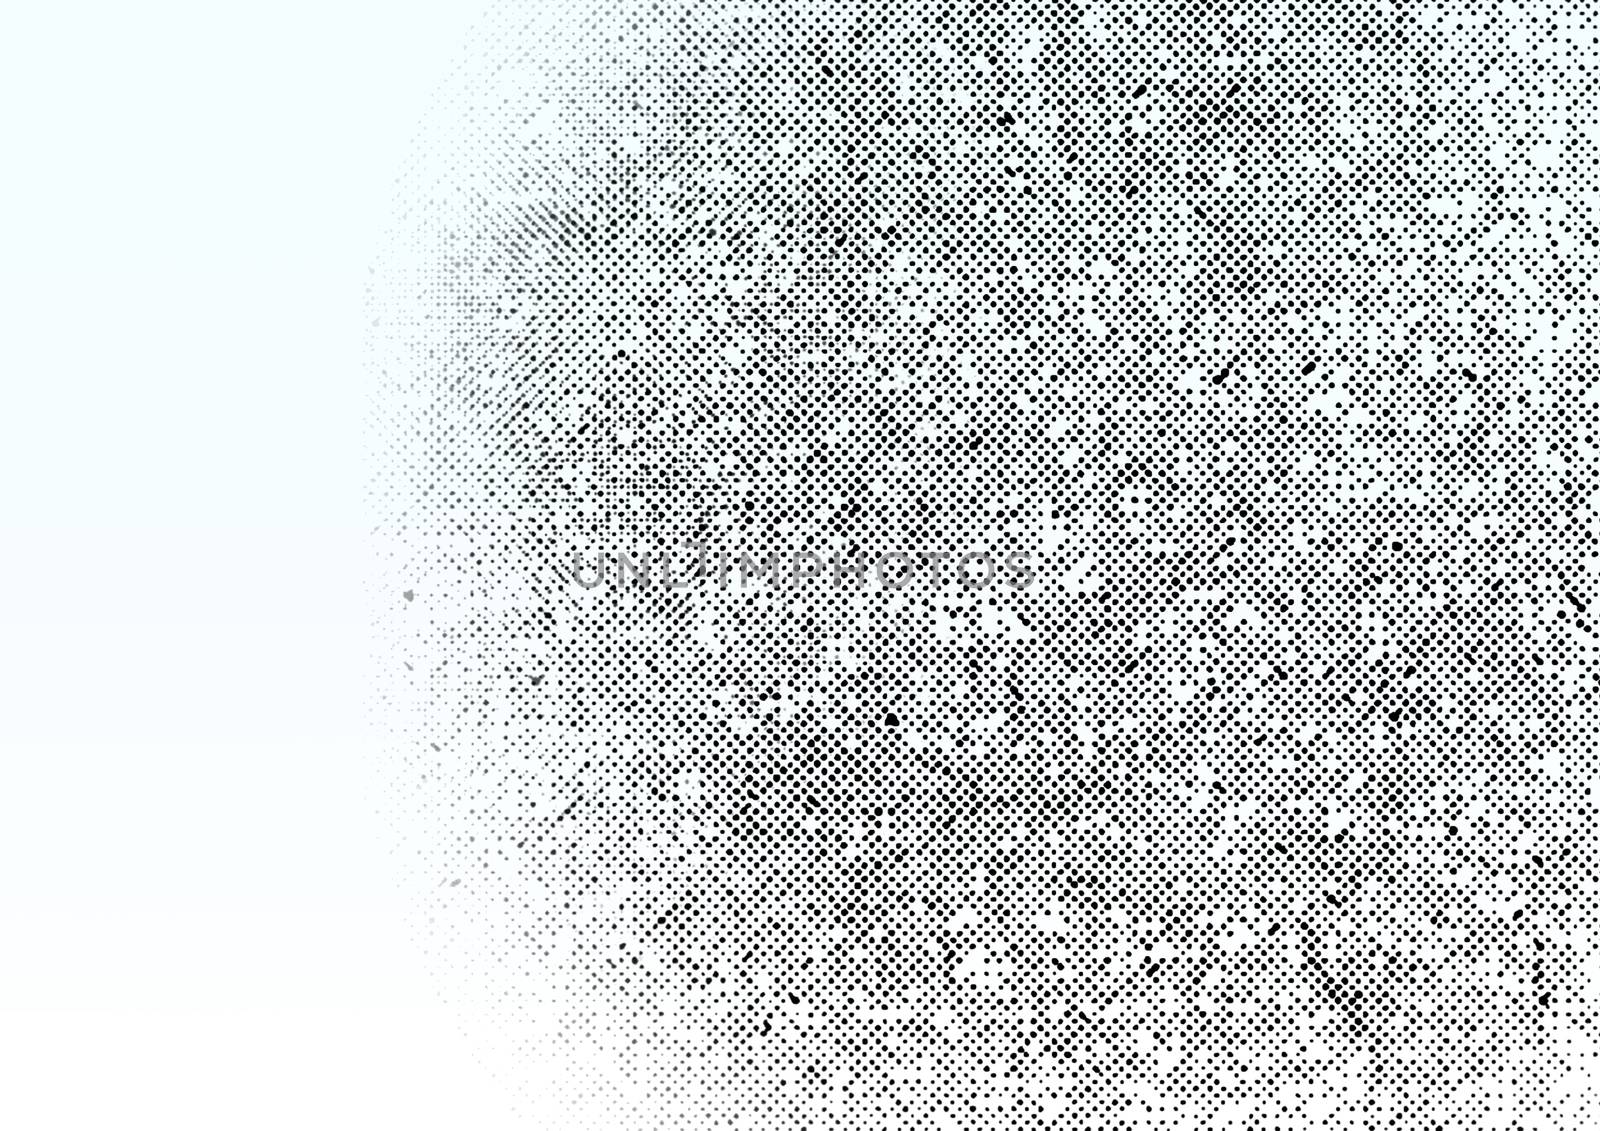 Grunge gradient dots vintage halftone ink background. Halftone gradient pattern made of dots with randomized circles. Pop art texture